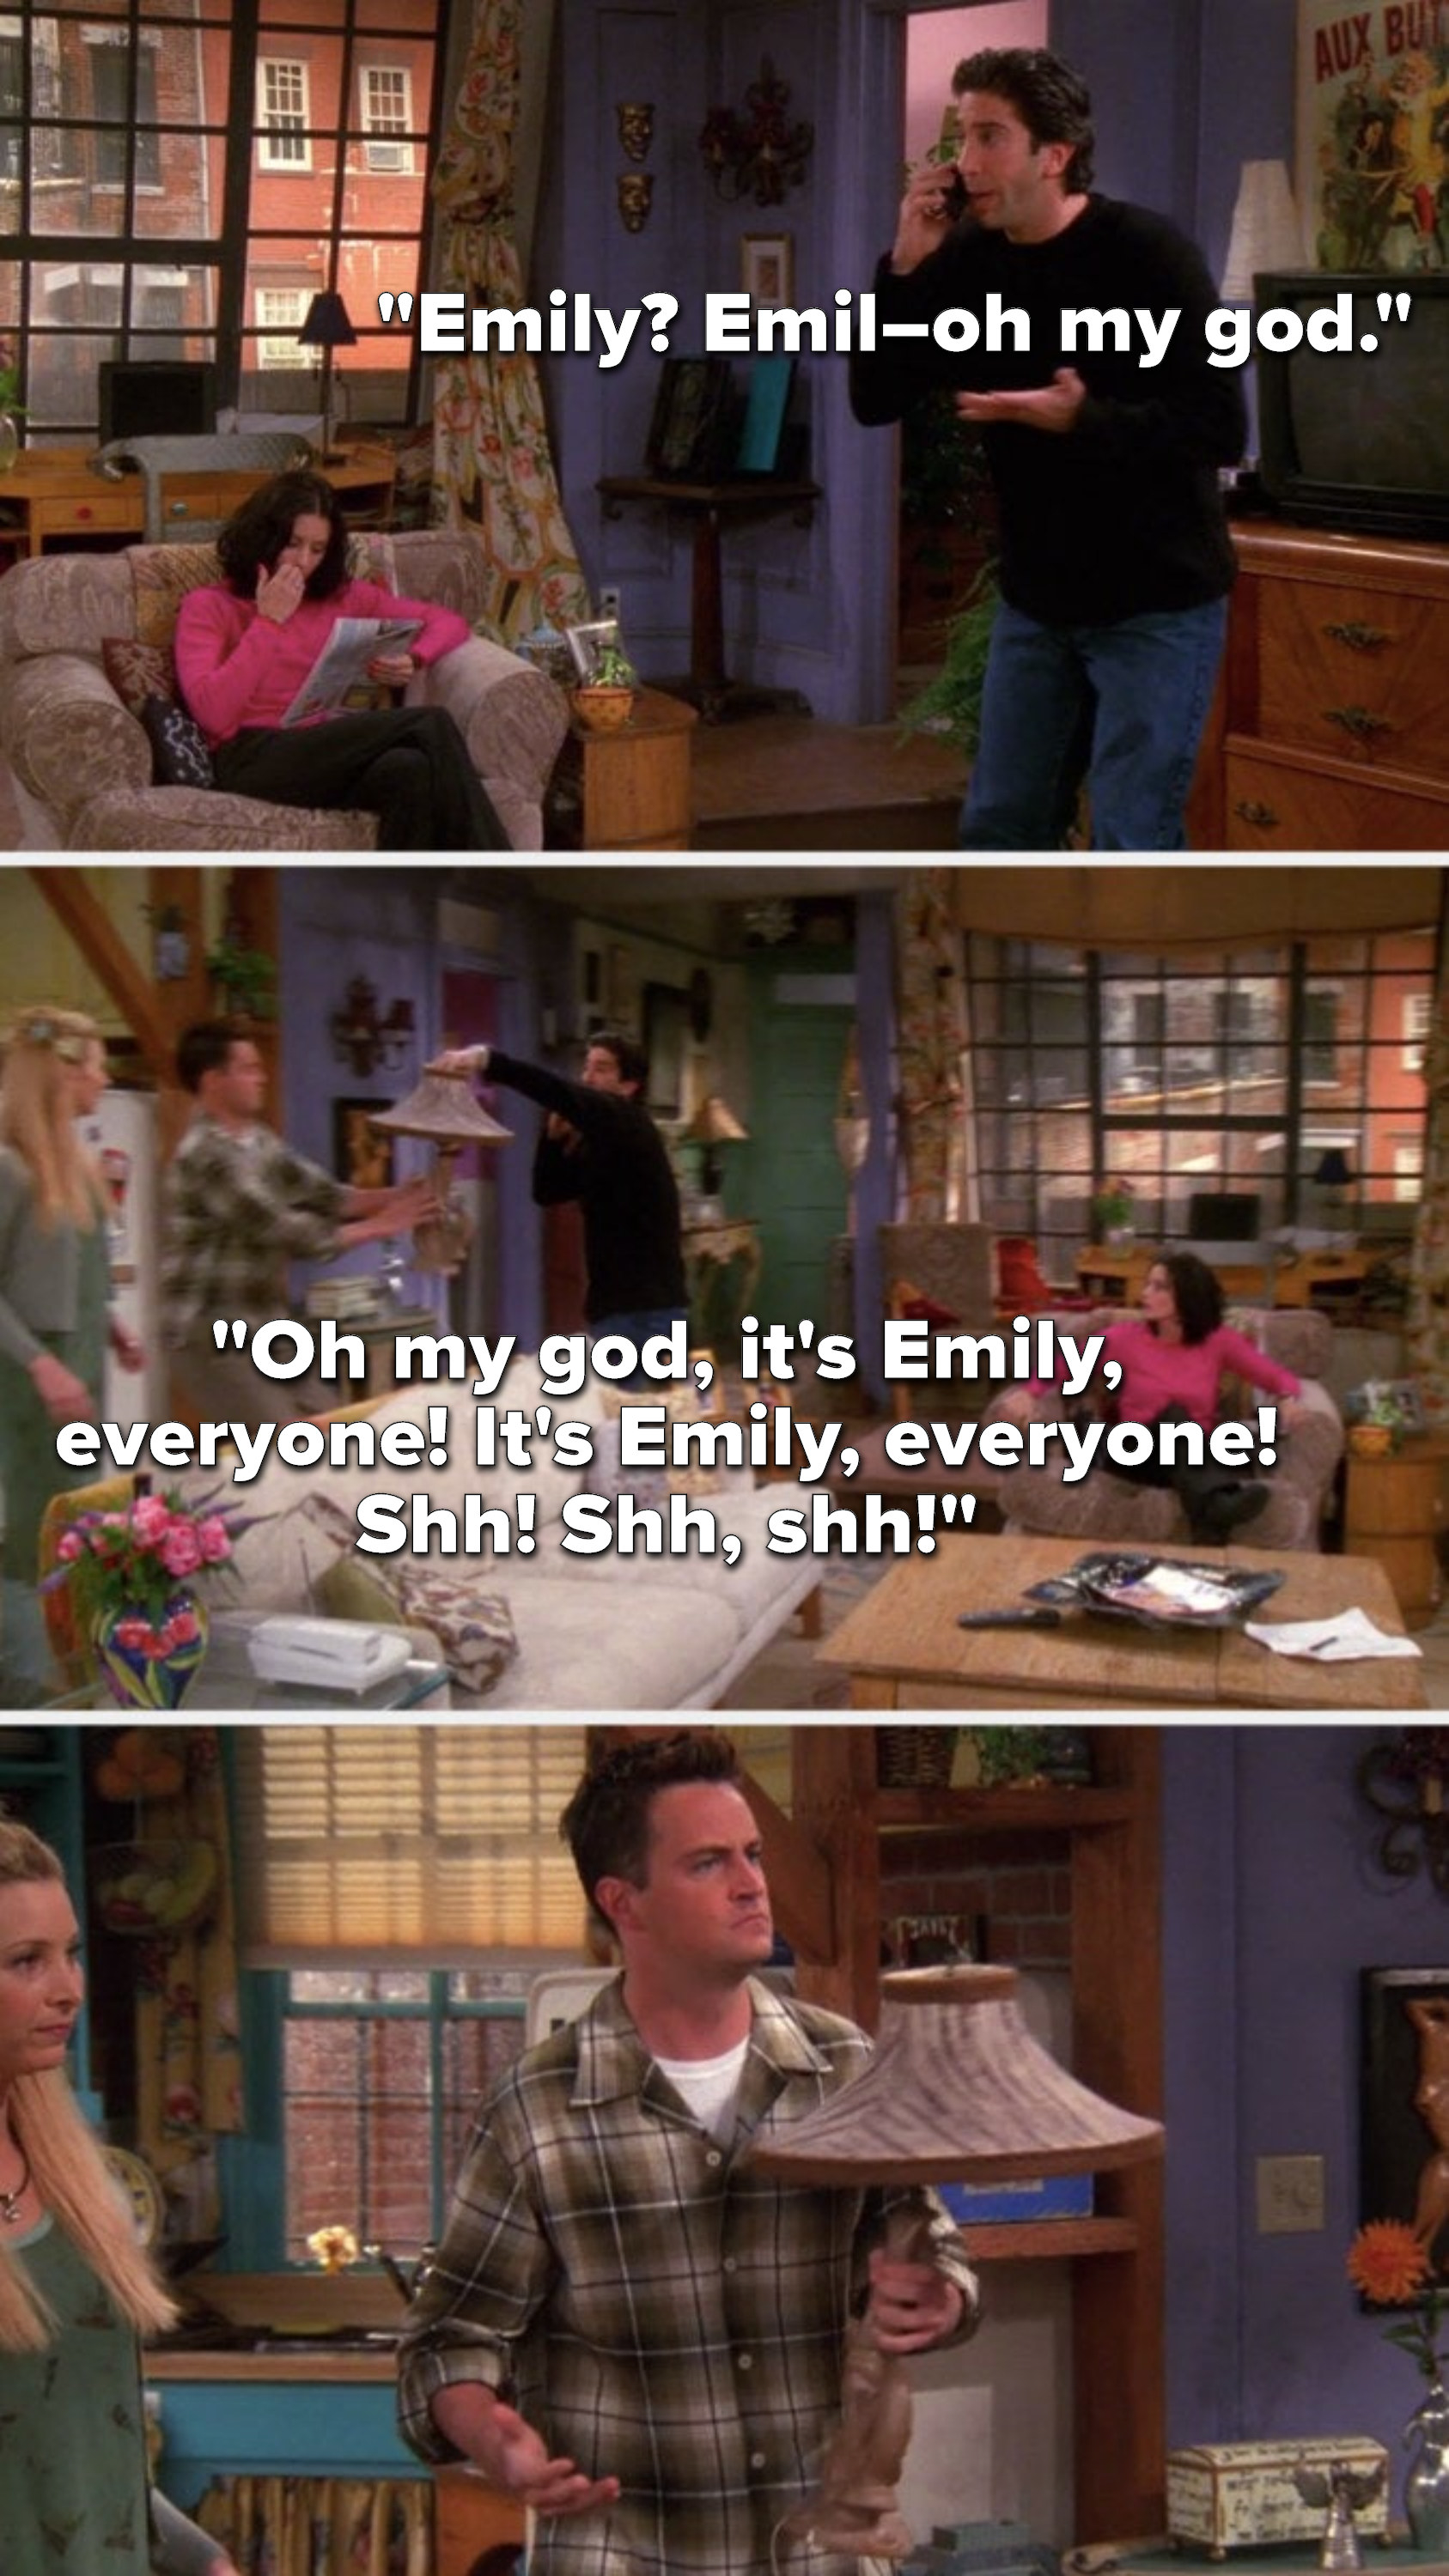 Ross is on the phone and says Emily, Emil oh my god, Oh my god, it&#x27;s Emily, everyone, it&#x27;s Emily, everyone, Shh, Shh, shh, meanwhile he hands Chandler a lamp and Chandler&#x27;s confused